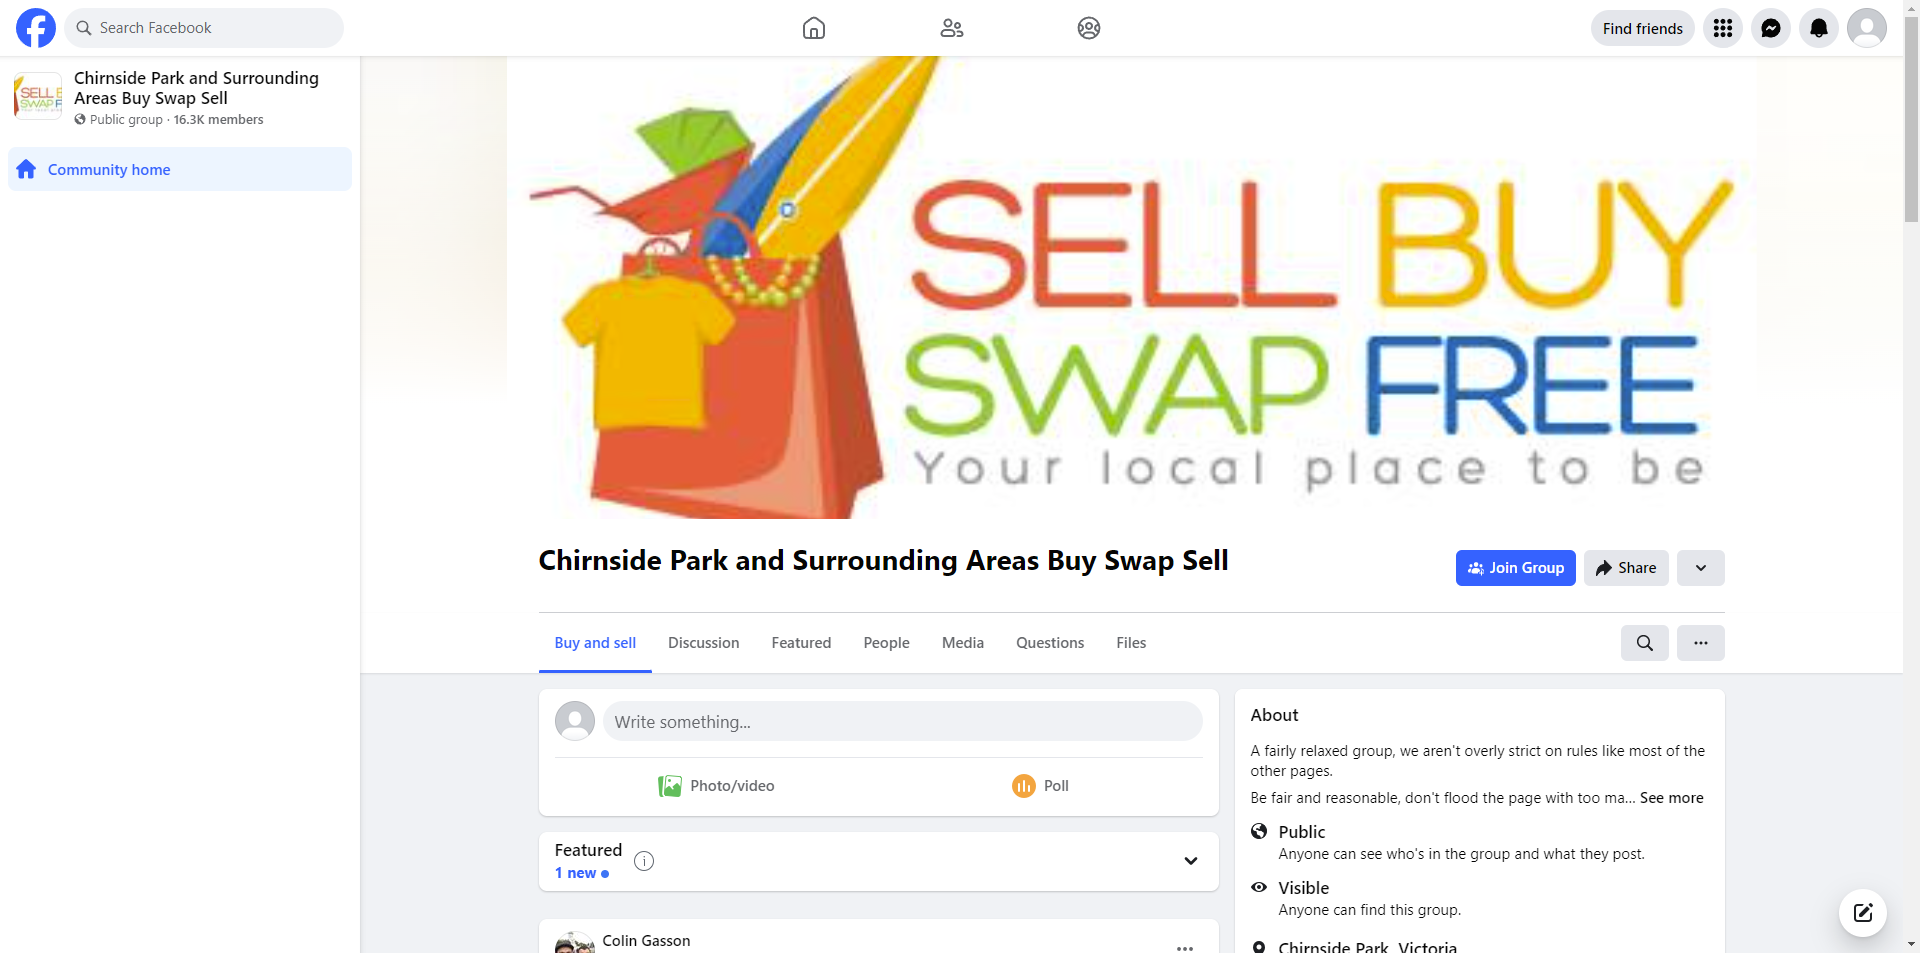 Chirnside Park and Surrounding Areas Buy Swap Sell